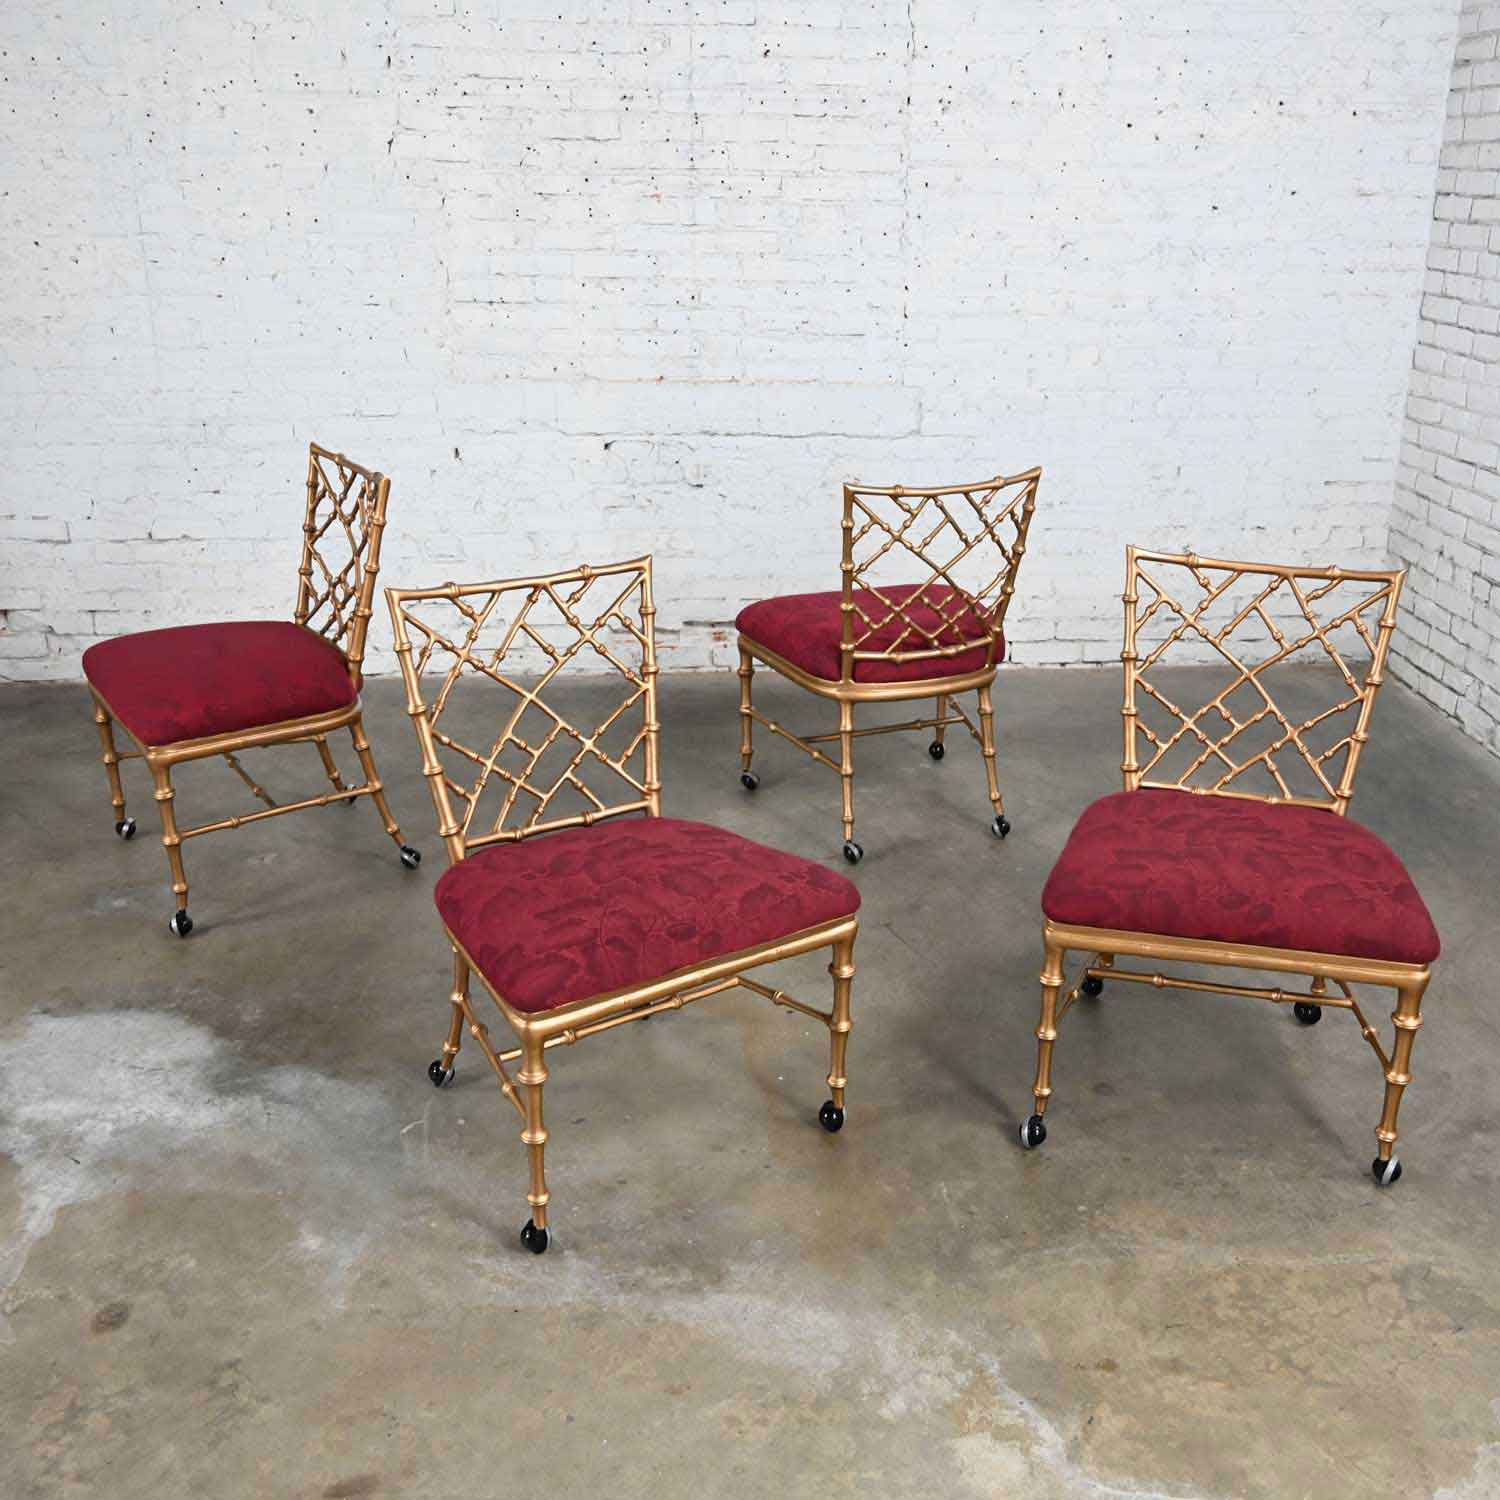 Vintage Chinoiserie Faux Bamboo Gold Painted Metal Rolling Chairs Style of Phyllis Morris Set of 4